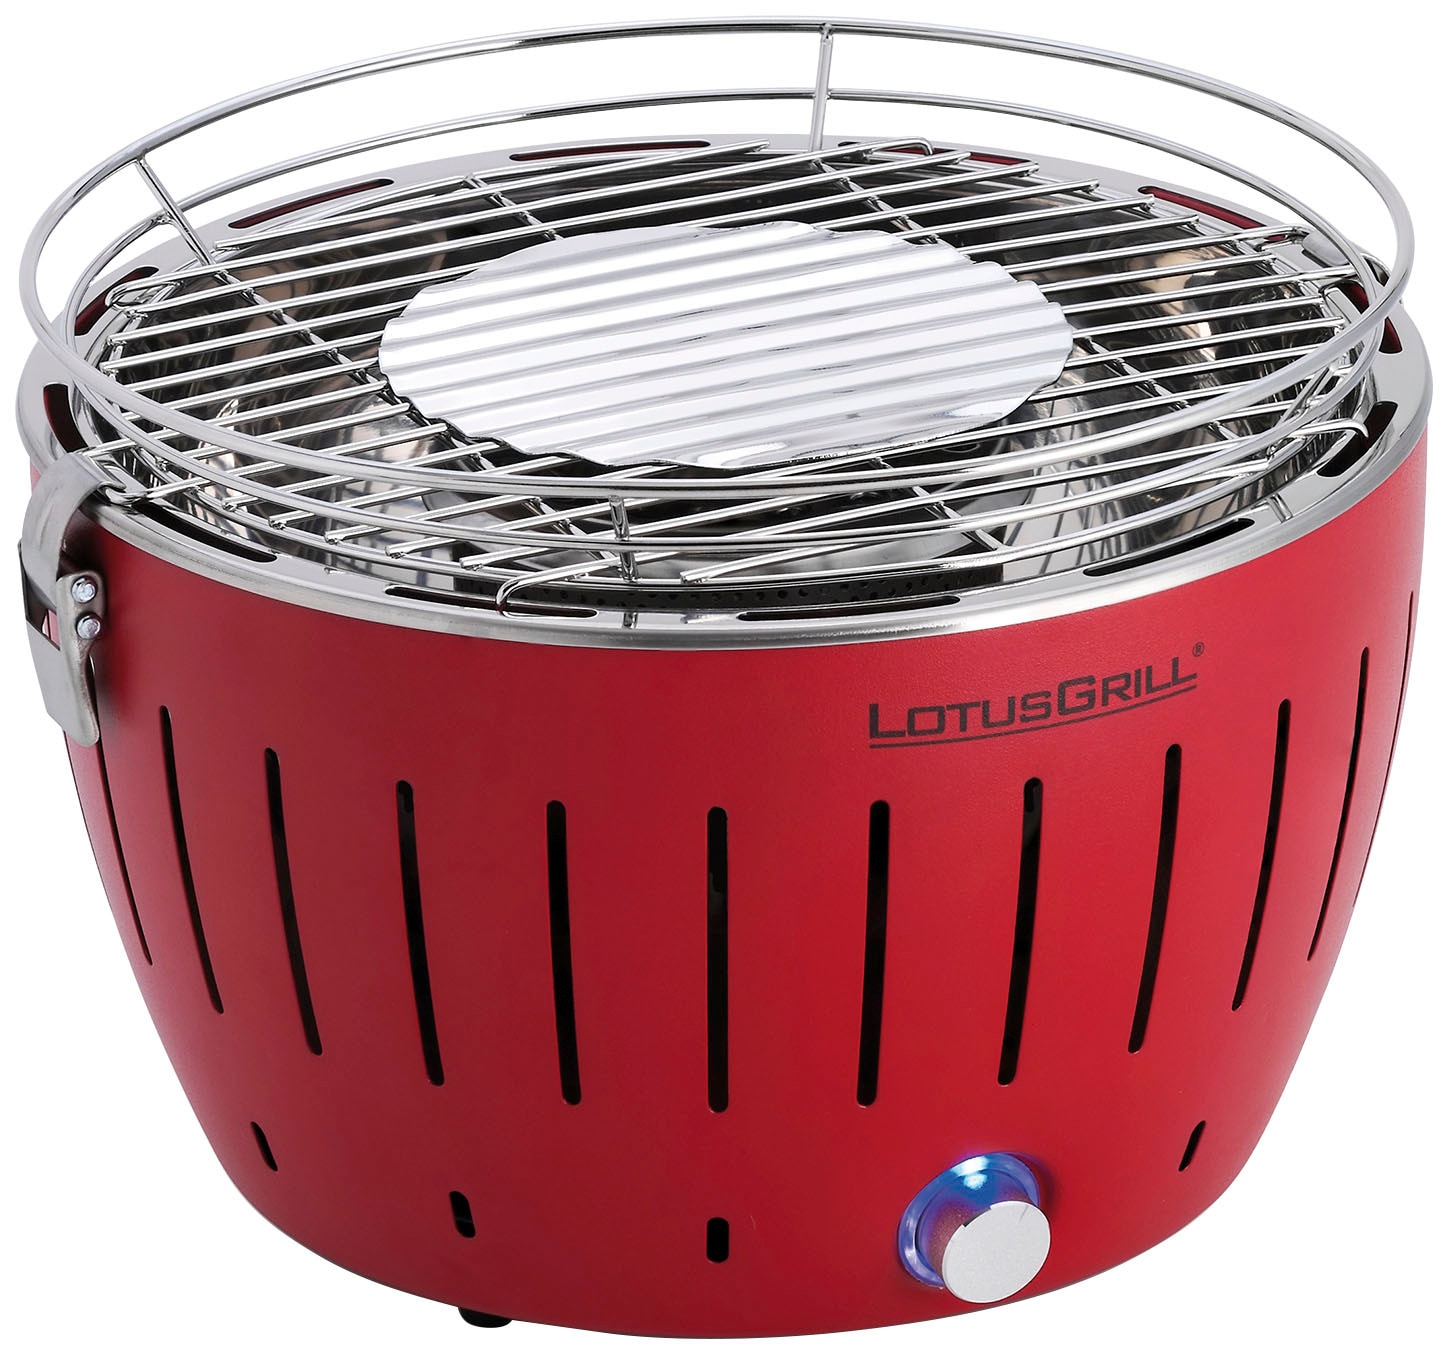 Lotus Grill - Portable Charcoal Grill - Mini - Red